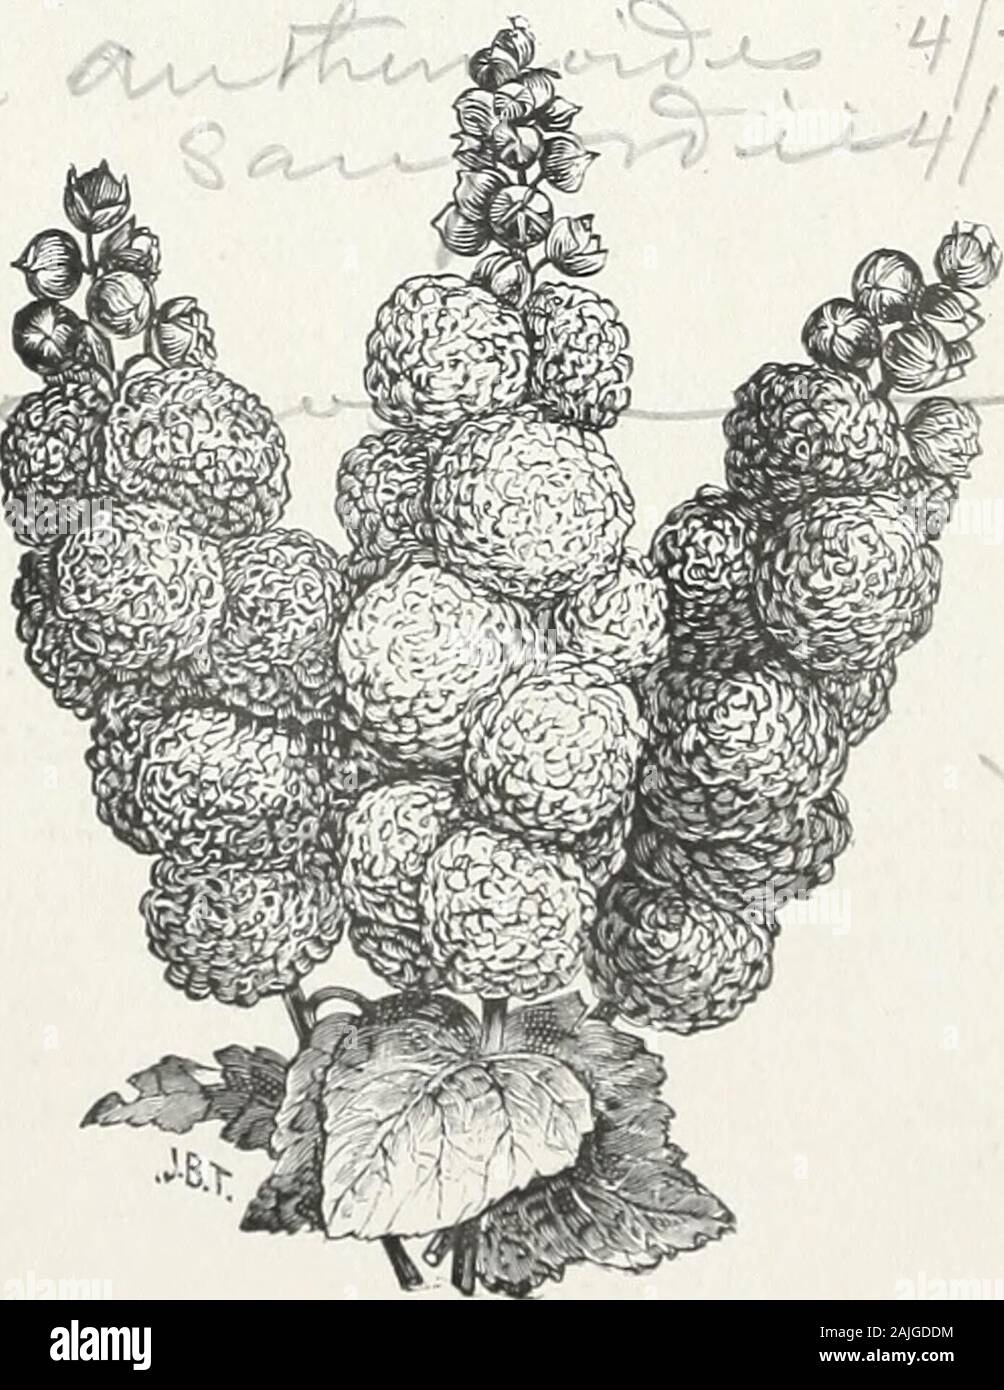 D M Ferry & Co.'s wholesale list of seeds for 1891 . Gourd, Pear Shaped. Apple shaped, striped.Pear ringed,Bottle. Powder horn. Mixed Helichrysum bracteatum, yellow. monstrosum, largest double mixed.Heliotrope, Dark Varieties mixed. f/t XL- Hollyhock, Double. D. M. FERRY & CO S WHOLESALE PRICE LIST. 39 PER OZ. PER LB Our own growth $1 111 Hollyhock, Double White, finest strain Rose, Salmon, ? Crimson, • *, k Choicest mixed Honesty, or Satin Flower, (Lunaria biennis) Hyacinth Bean, Purple, (Dolichos lablab) White, igrals mixed Ipomea coccinea, fine scarlet bona nox (good night) white limbata, p Stock Photo